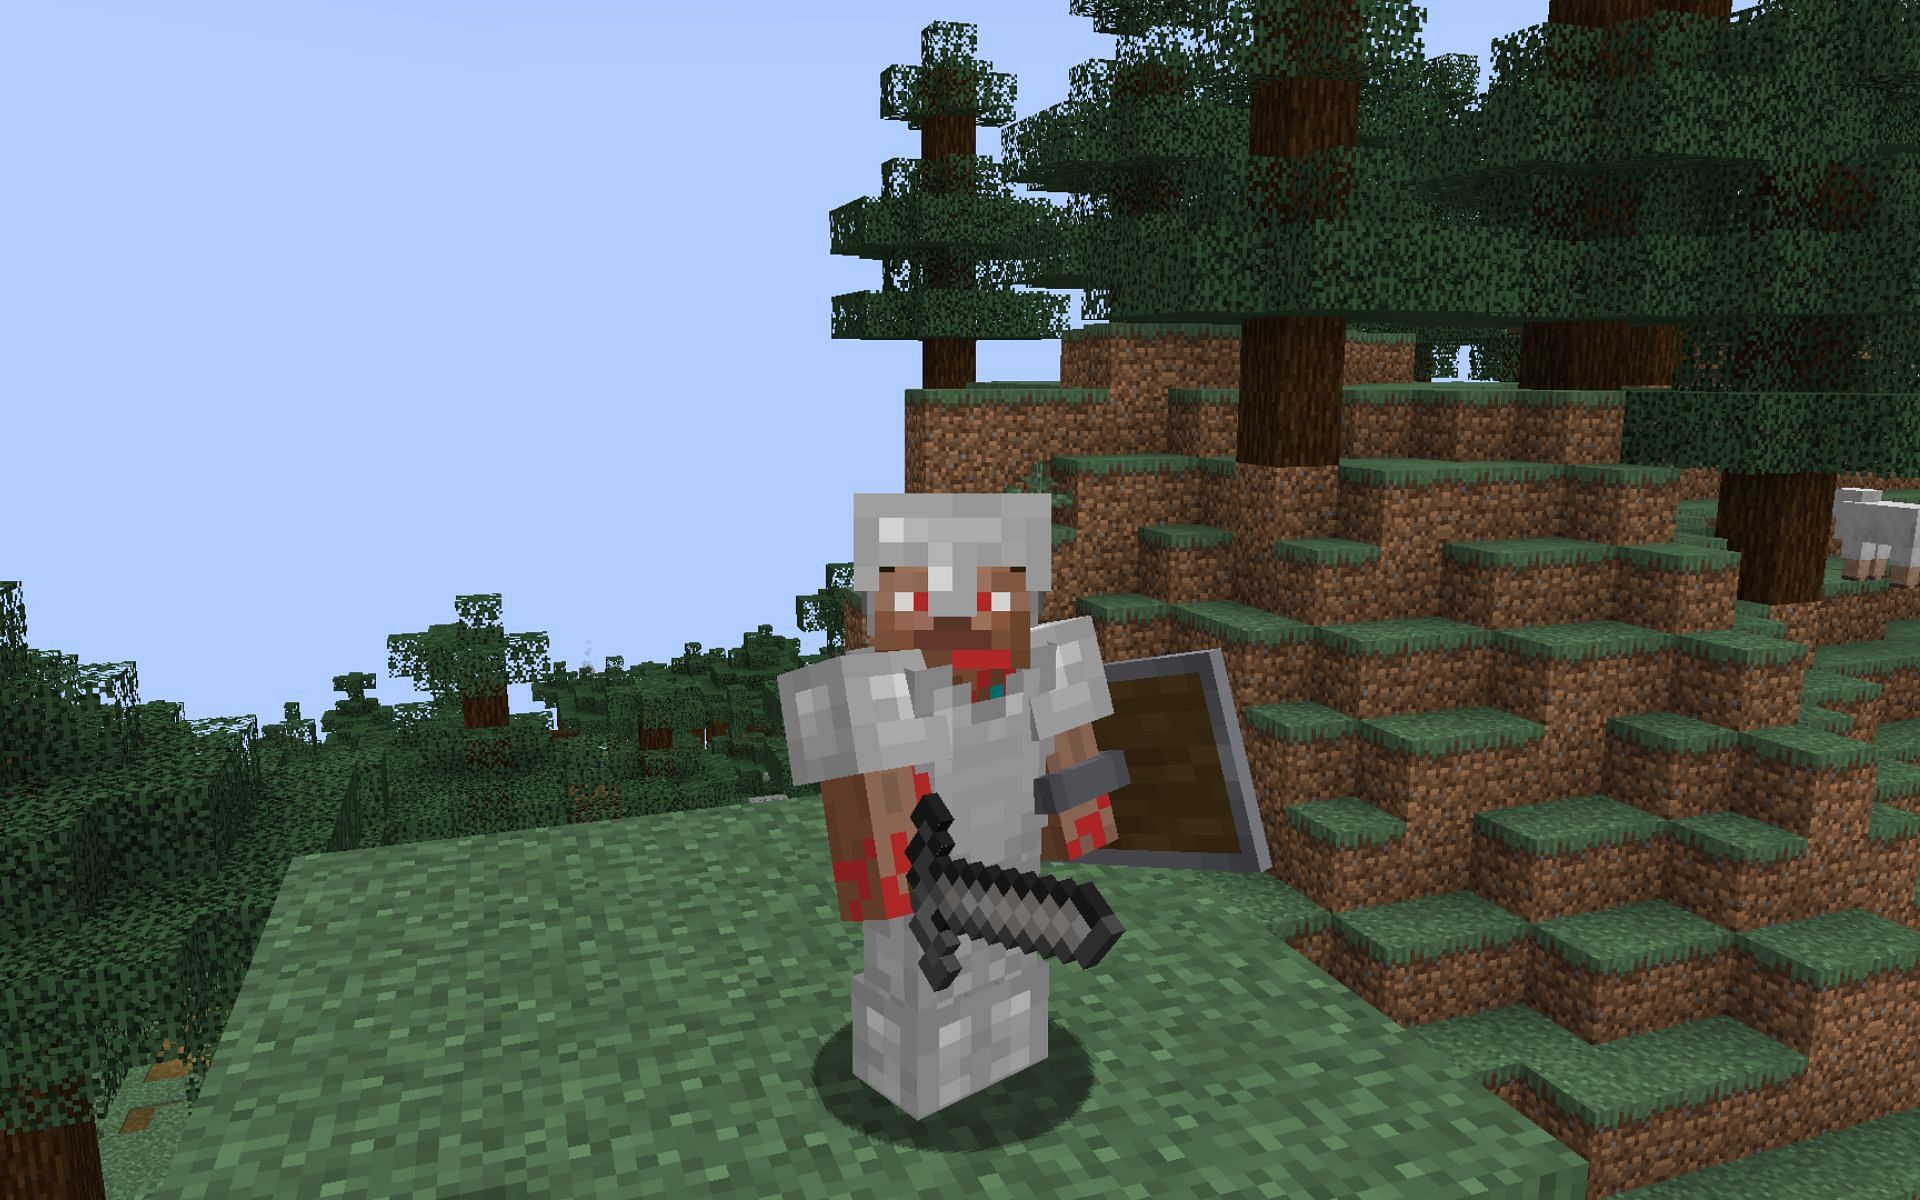 5 things player should remember as a beginner (Image via Minecraft)